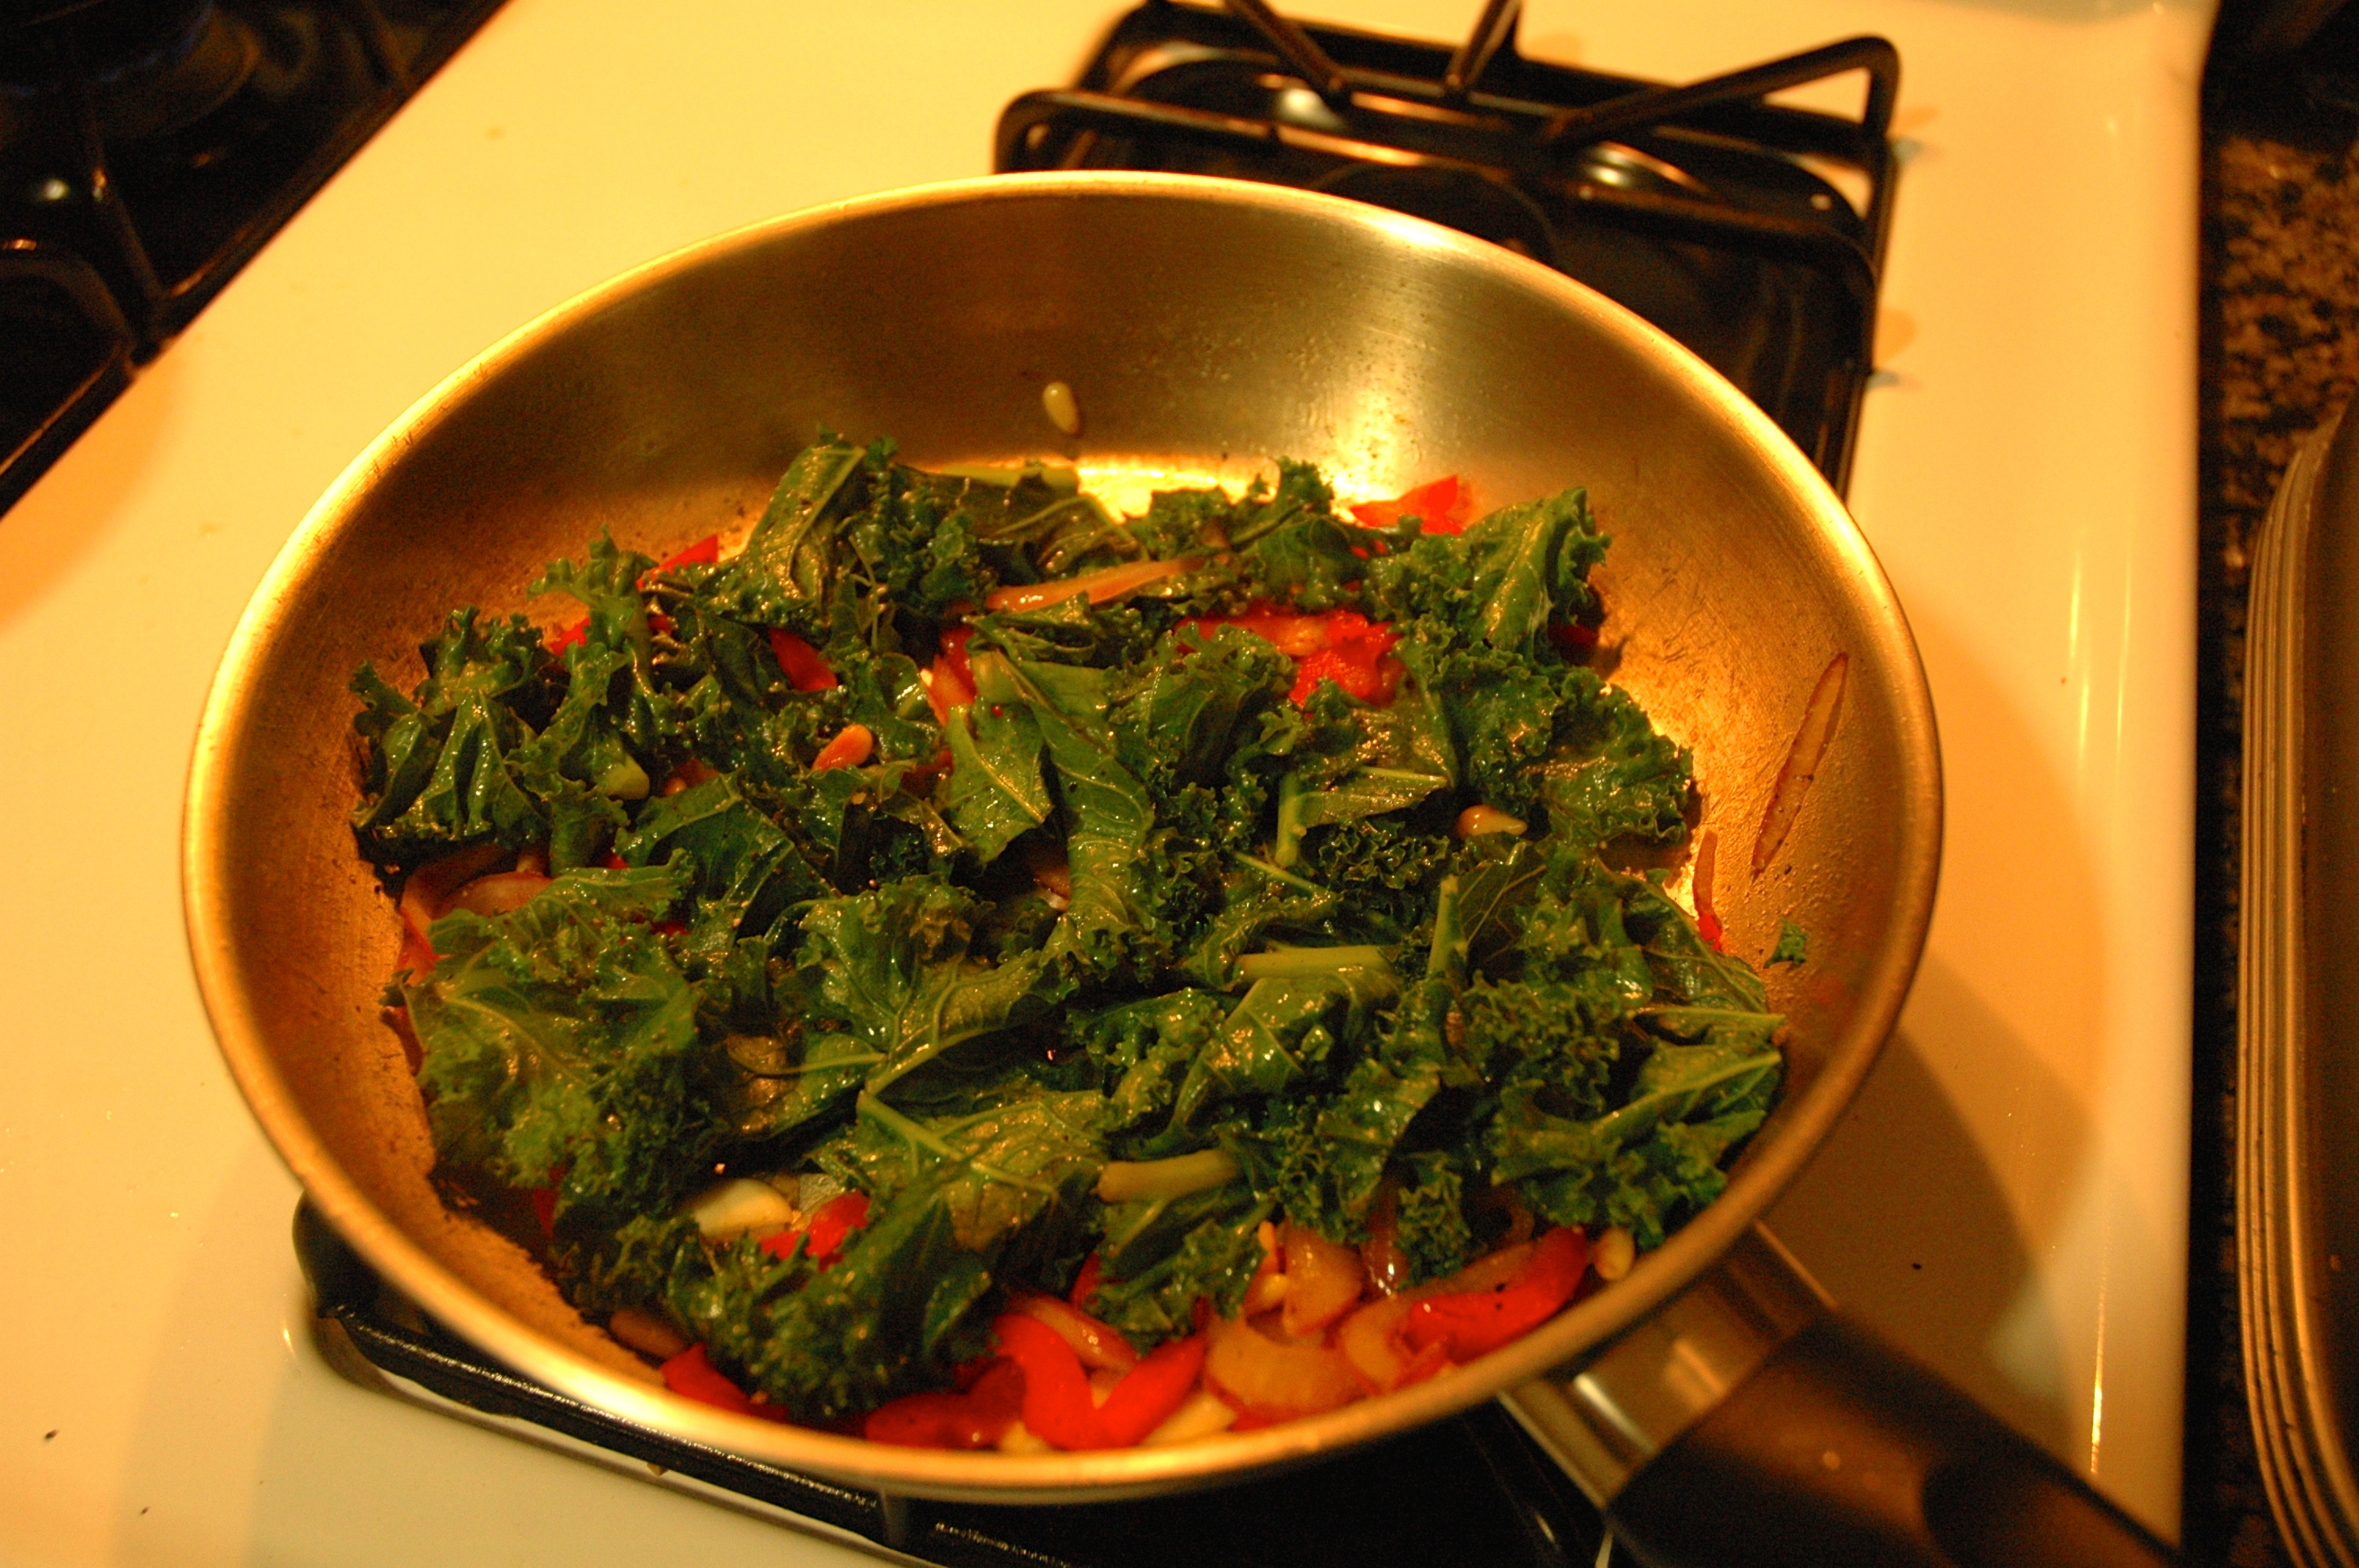 Sautéed Kale with red pepper, onion, black olive and pine nuts by Tracy Lee Karner